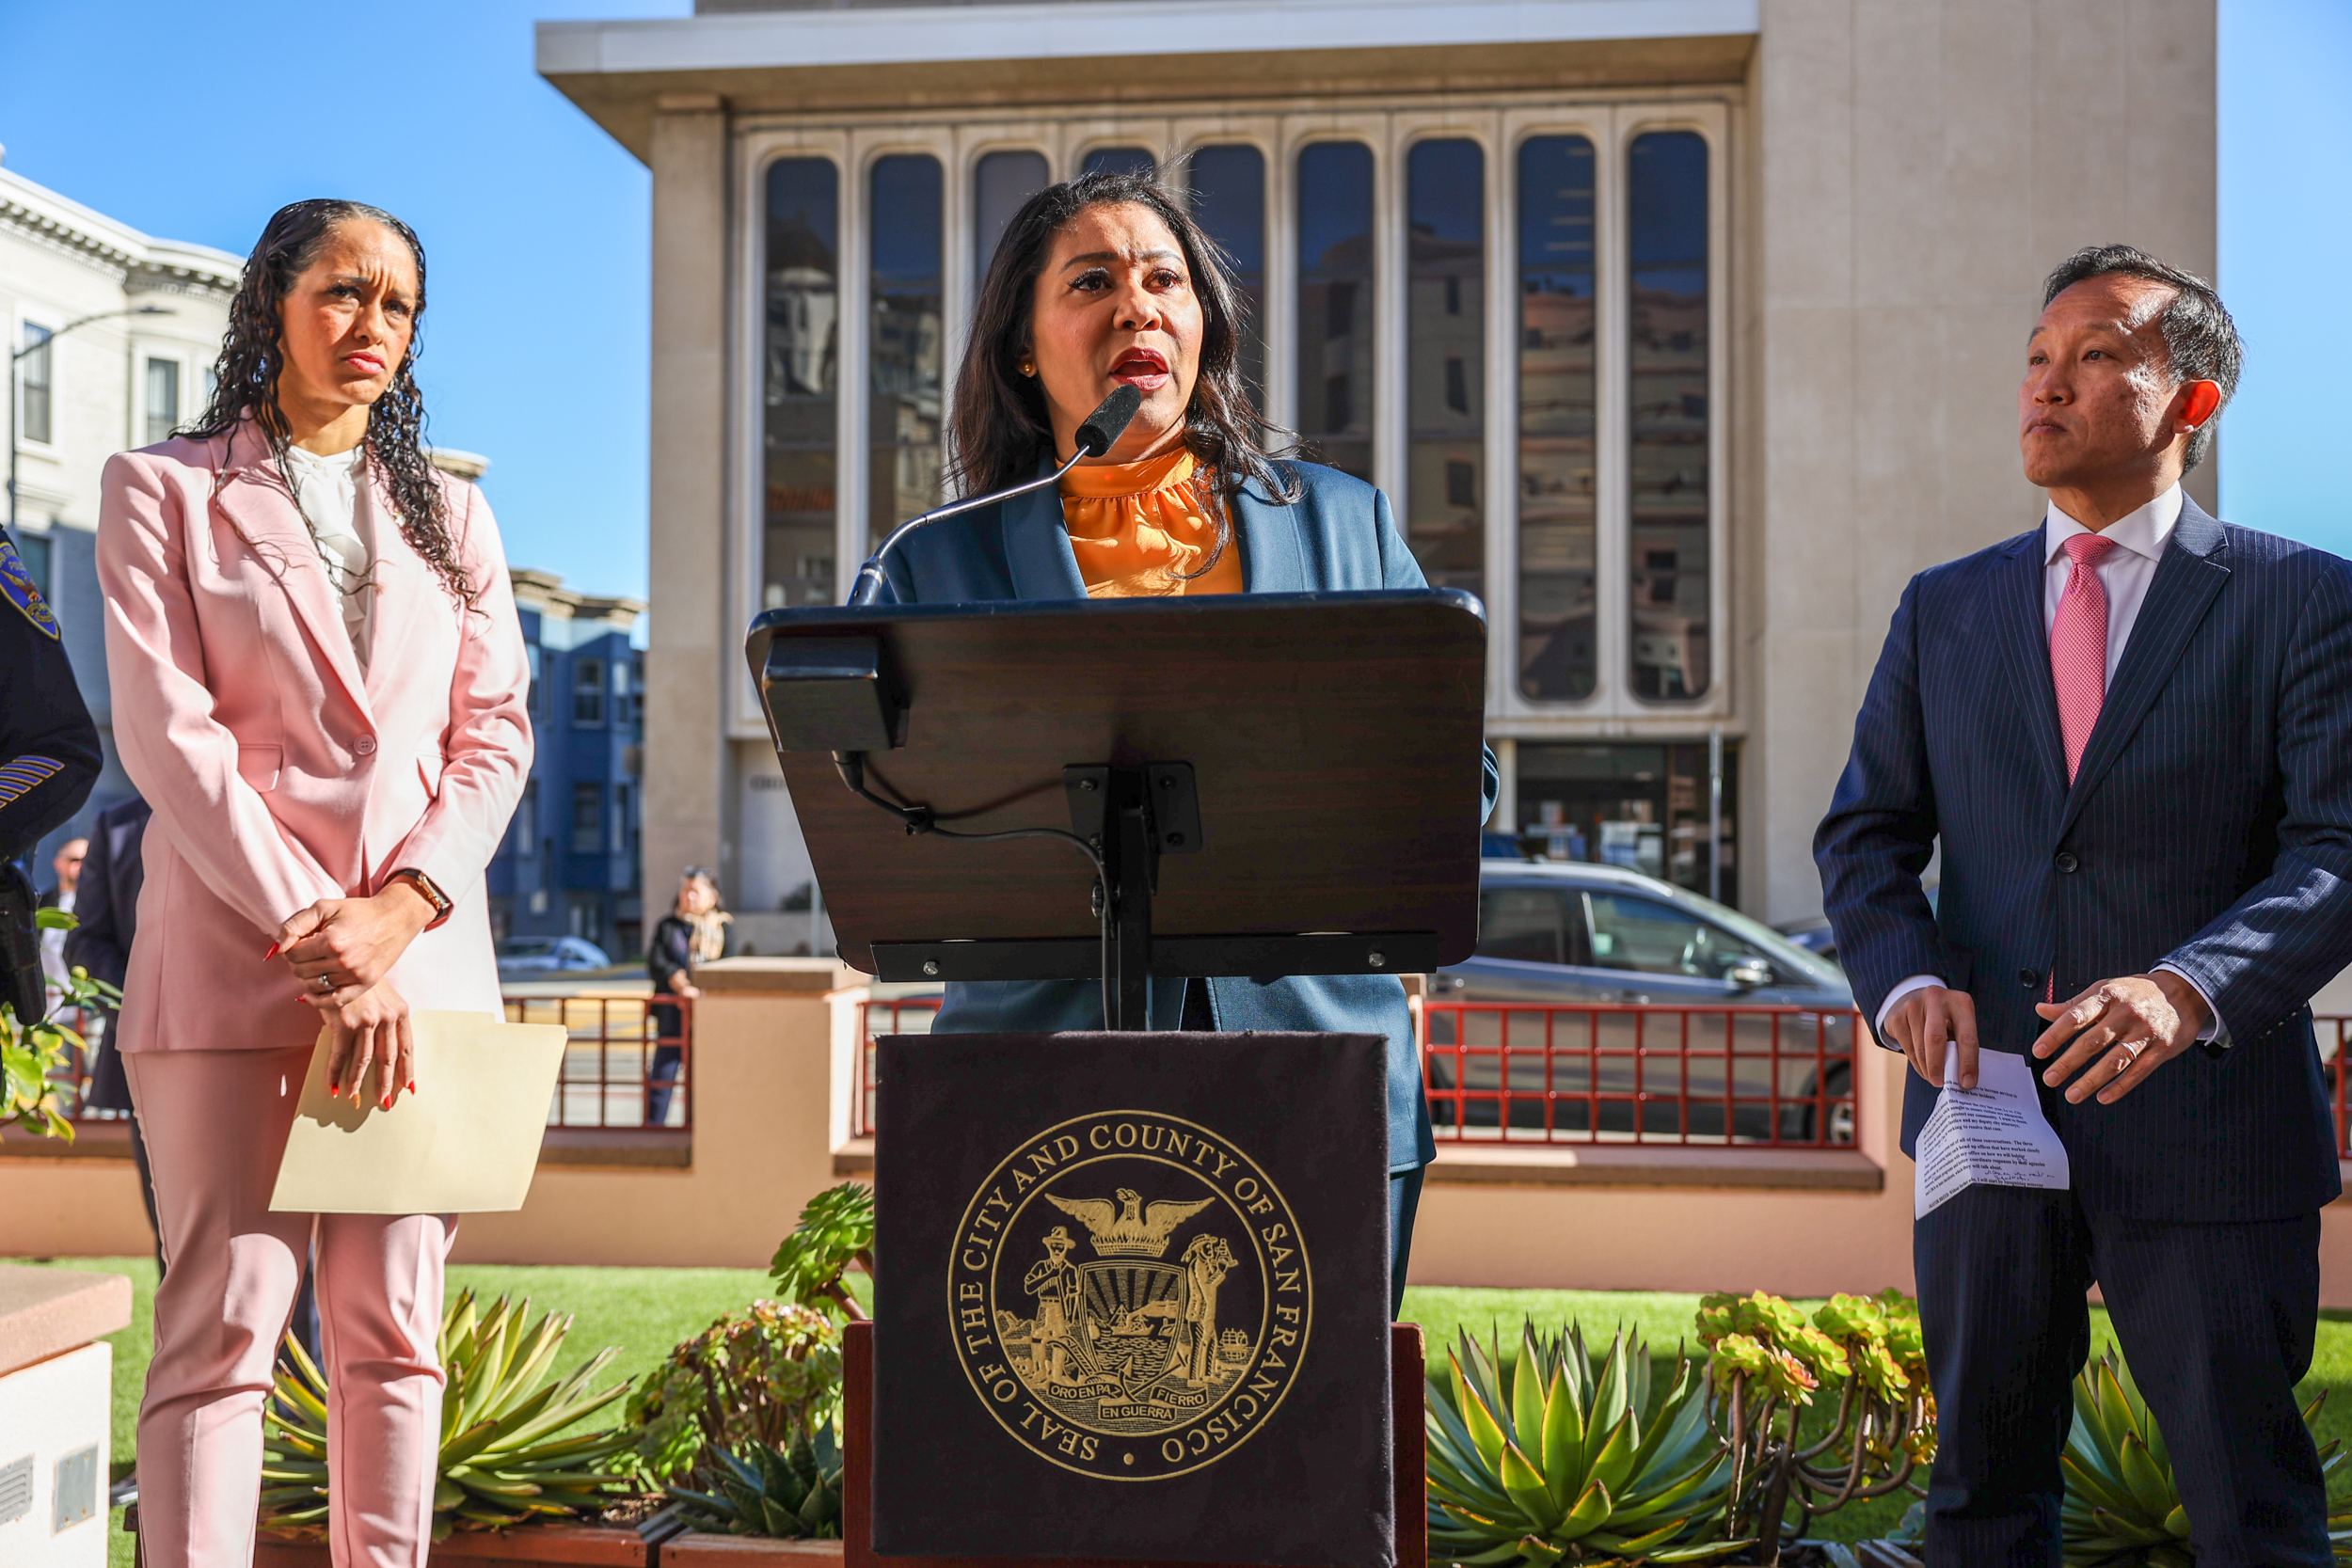 Three people in formal attire stand outdoors near a podium, which is adorned with a seal reading "City and County of San Francisco." One person speaks into a microphone.